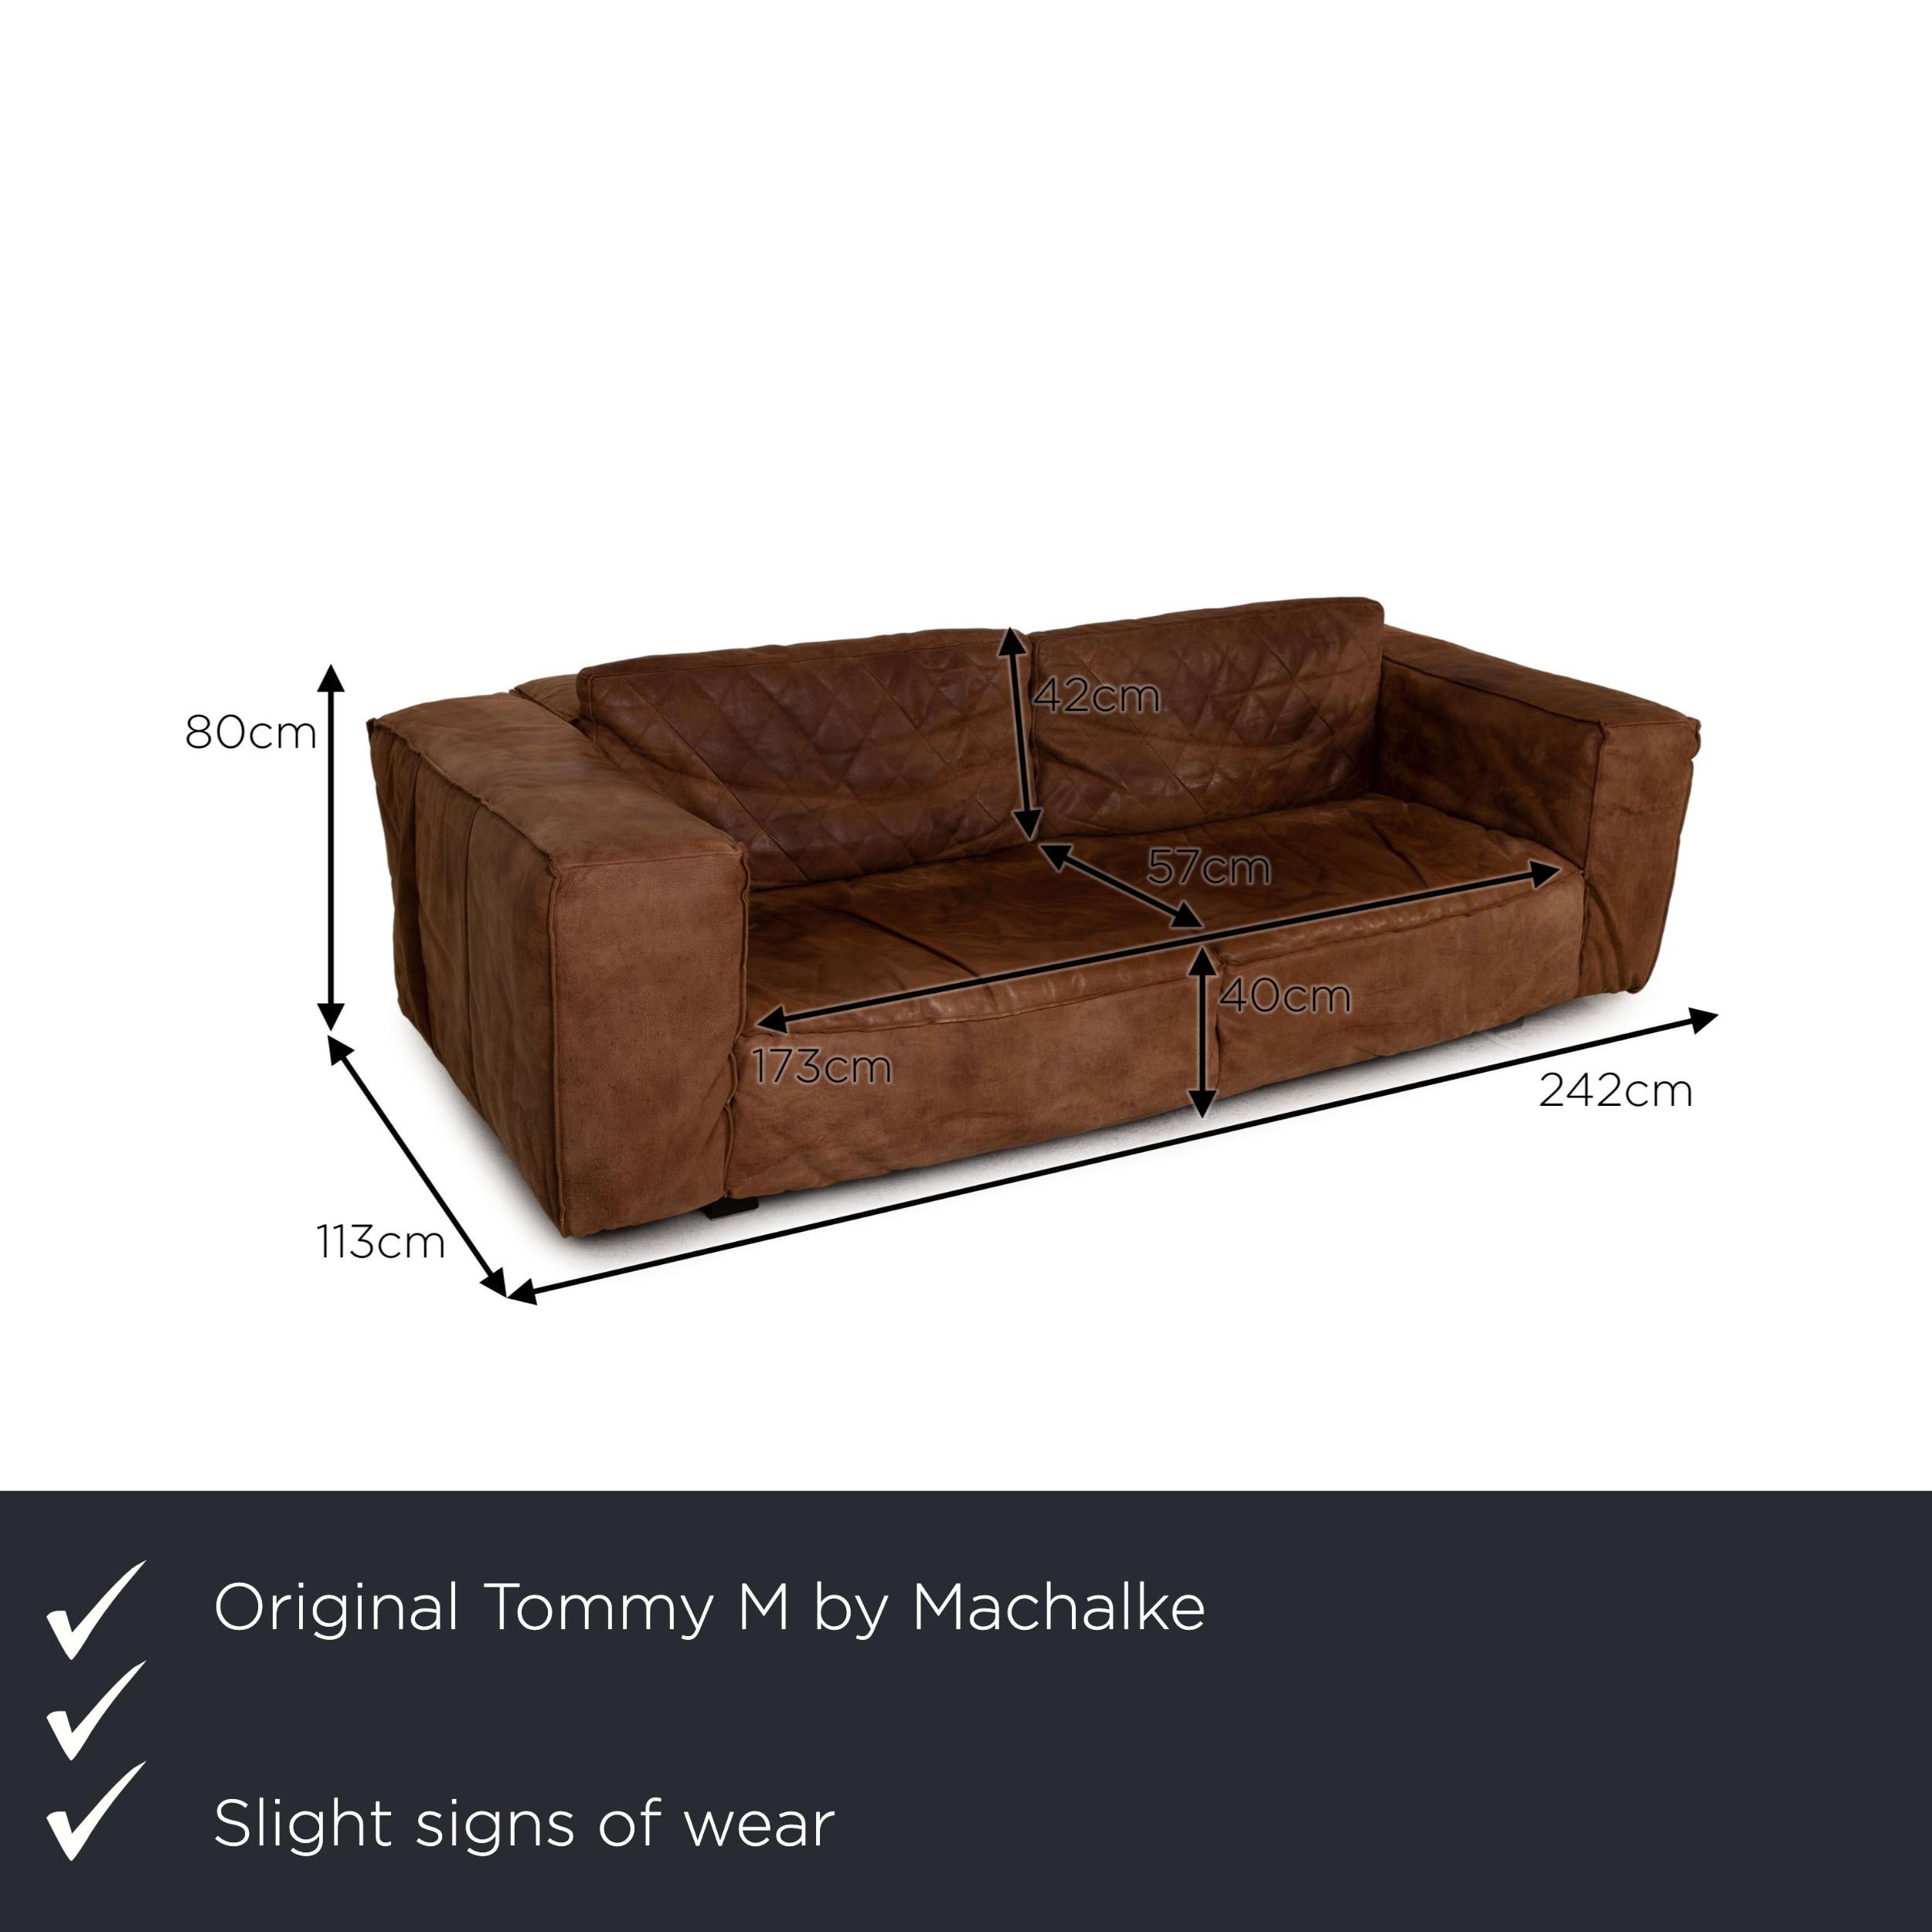 We present to you a Tommy M by Machalke leather sofa brown four-seater couch.

Product measurements in centimeters:

depth: 113
width: 242
height: 80
seat height: 40
rest height: 70
seat depth: 57
seat width: 173
back height: 42.
 
 